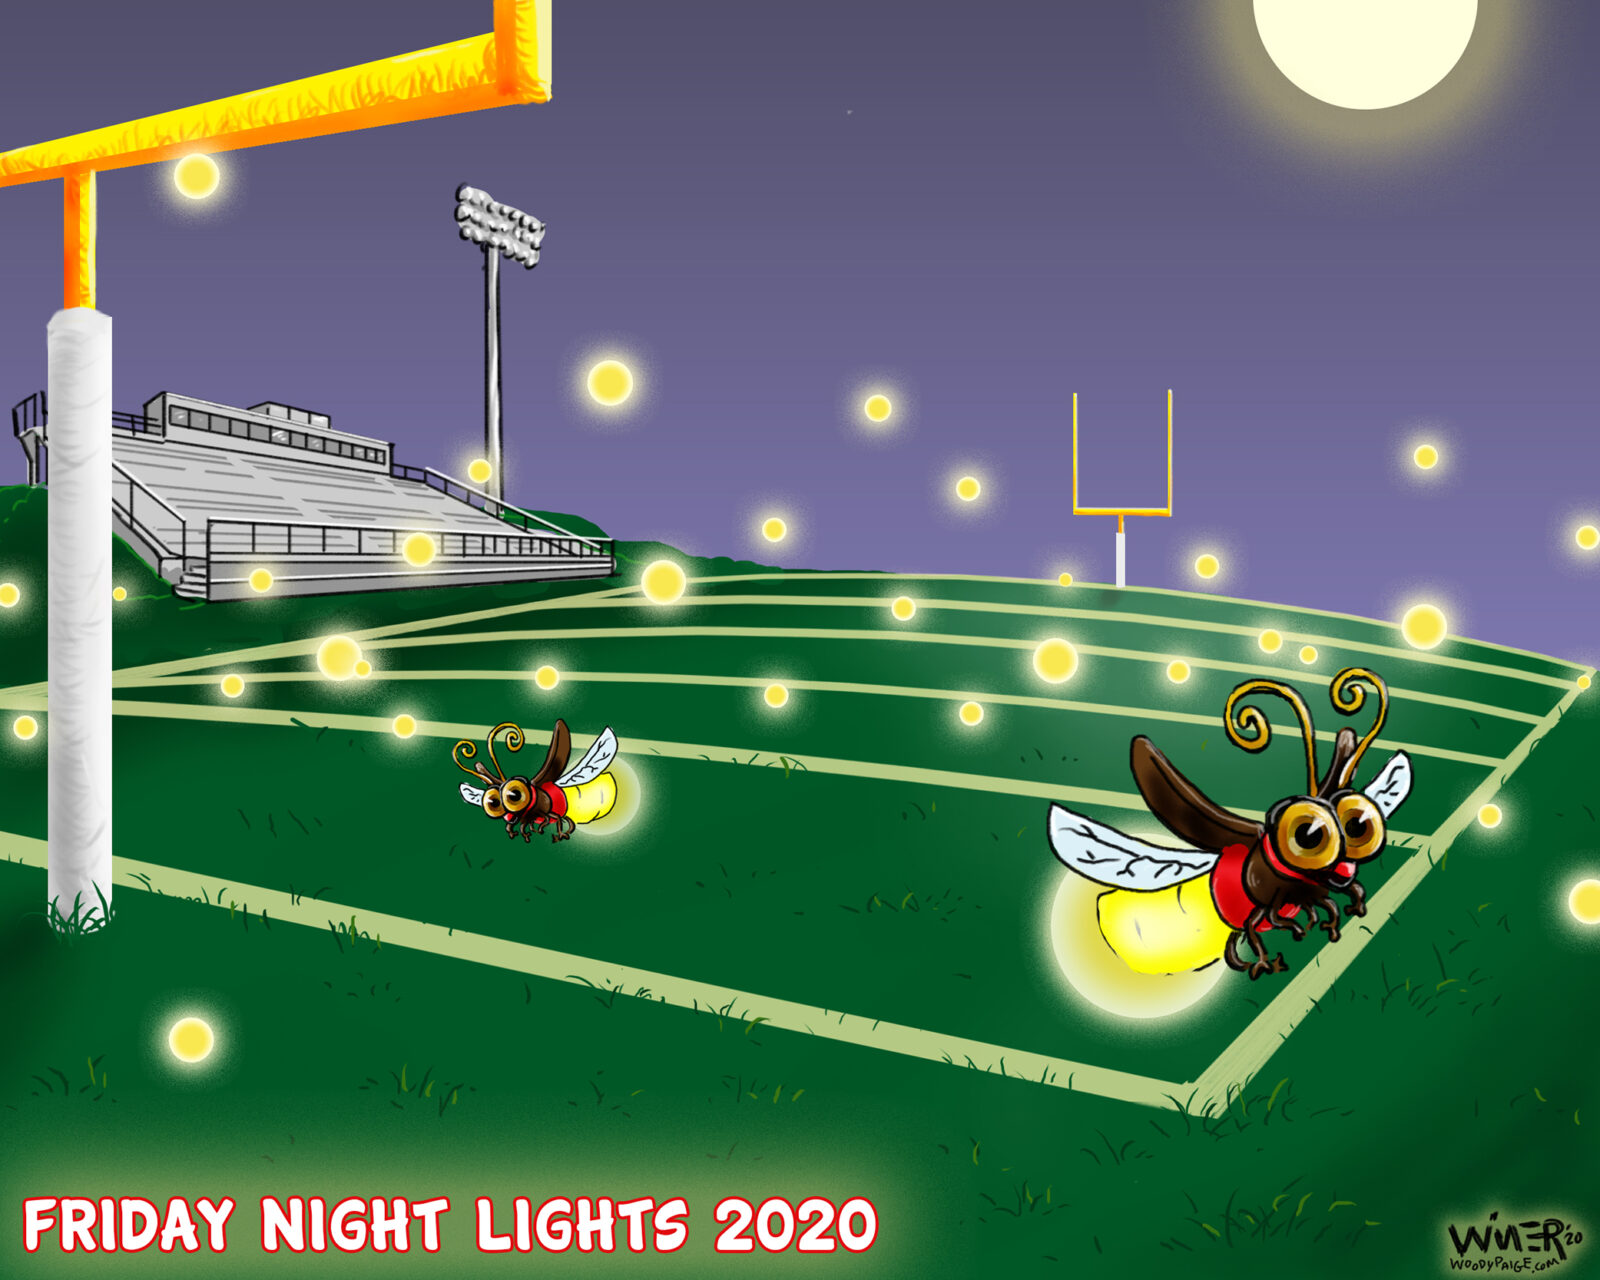 Friday Night Lights takes on a new meaning for much of the country during the Covid pandemic.